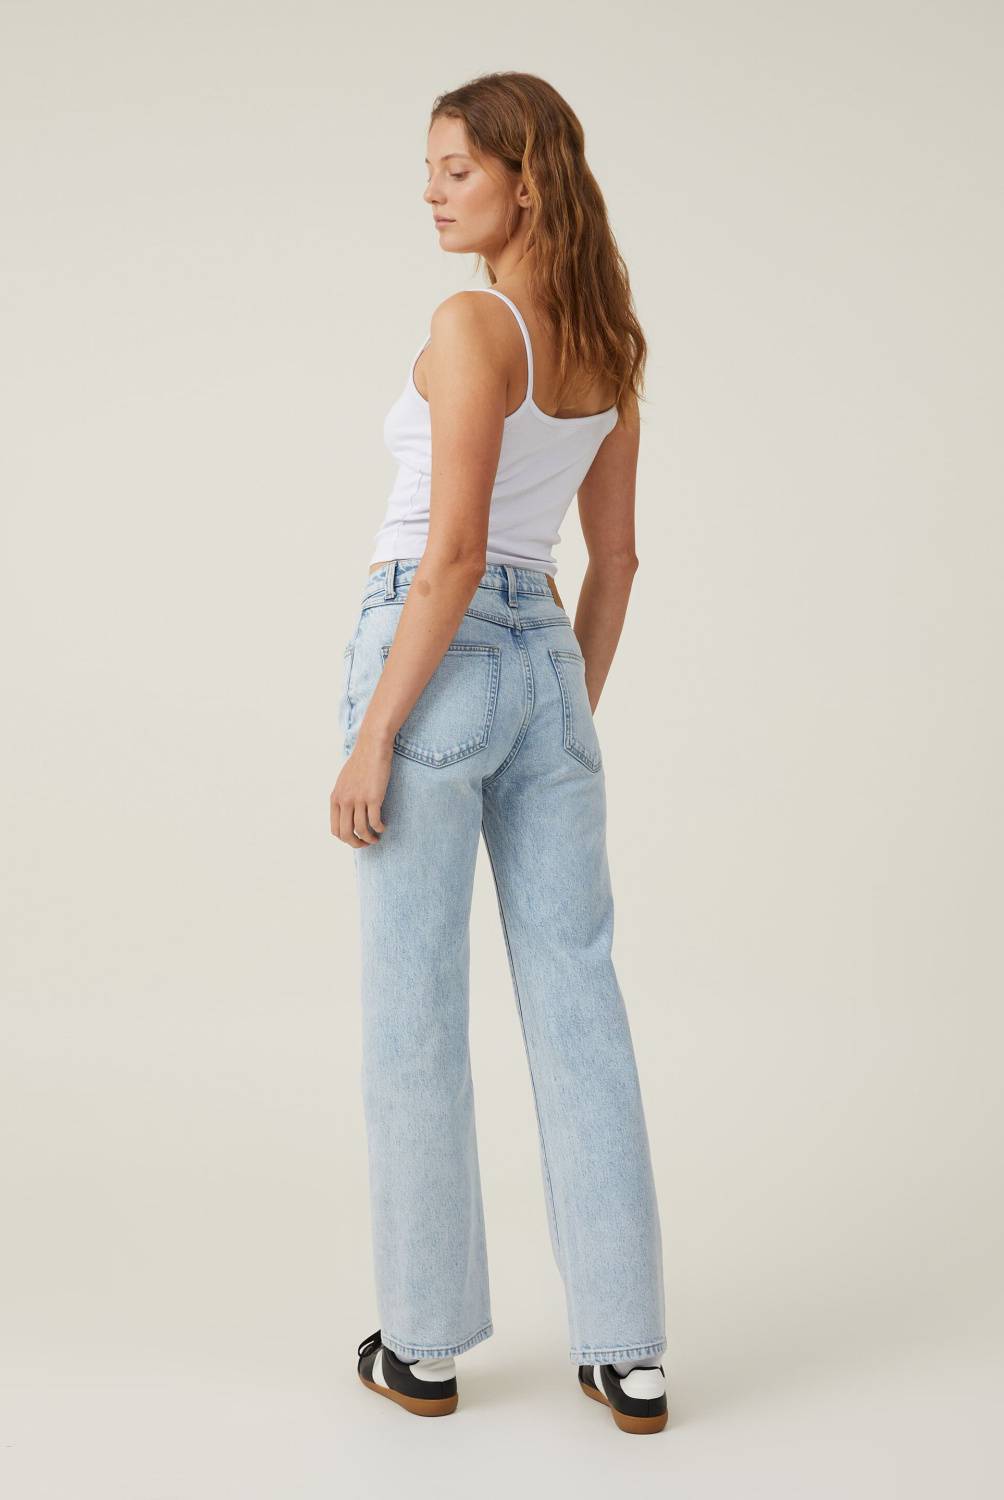 COTTON ON Jeans Recto Mujer Cotton On